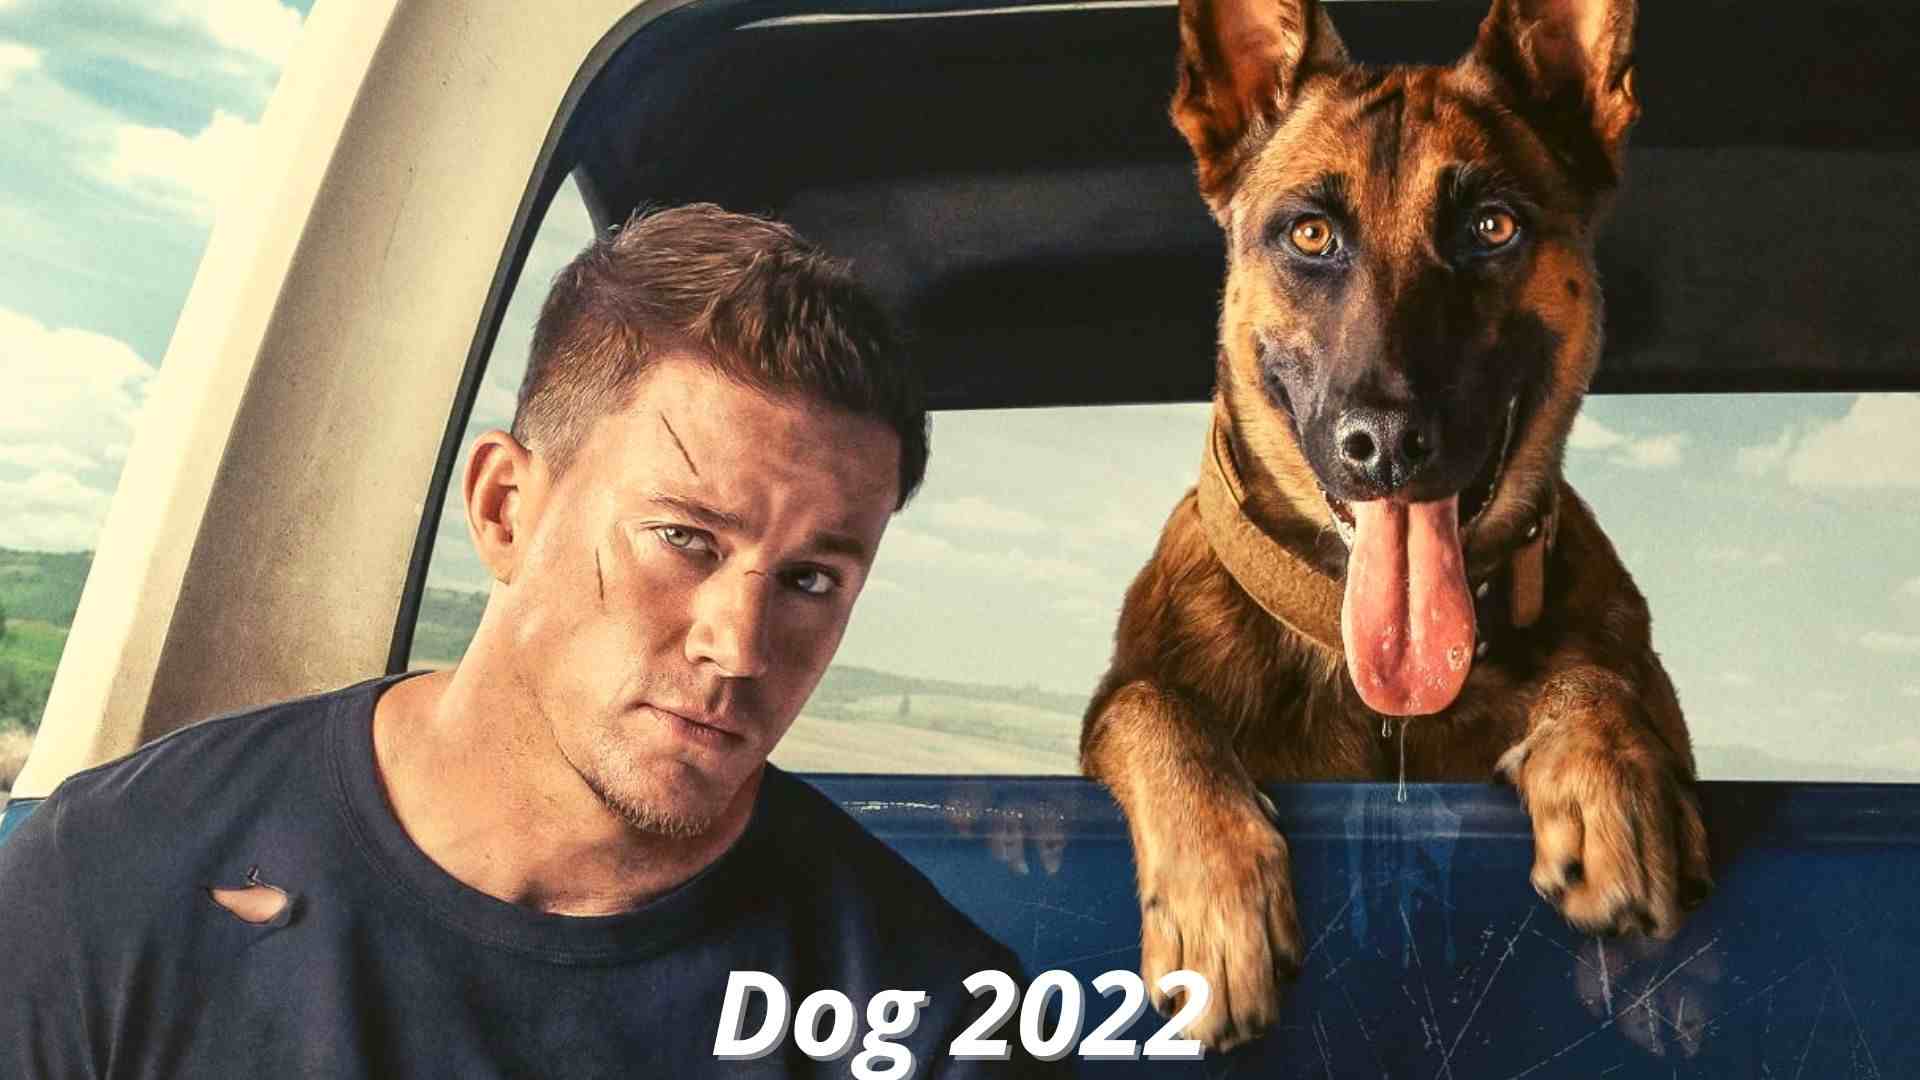 Dog 2022 Release Date, Star Cast, and Plot